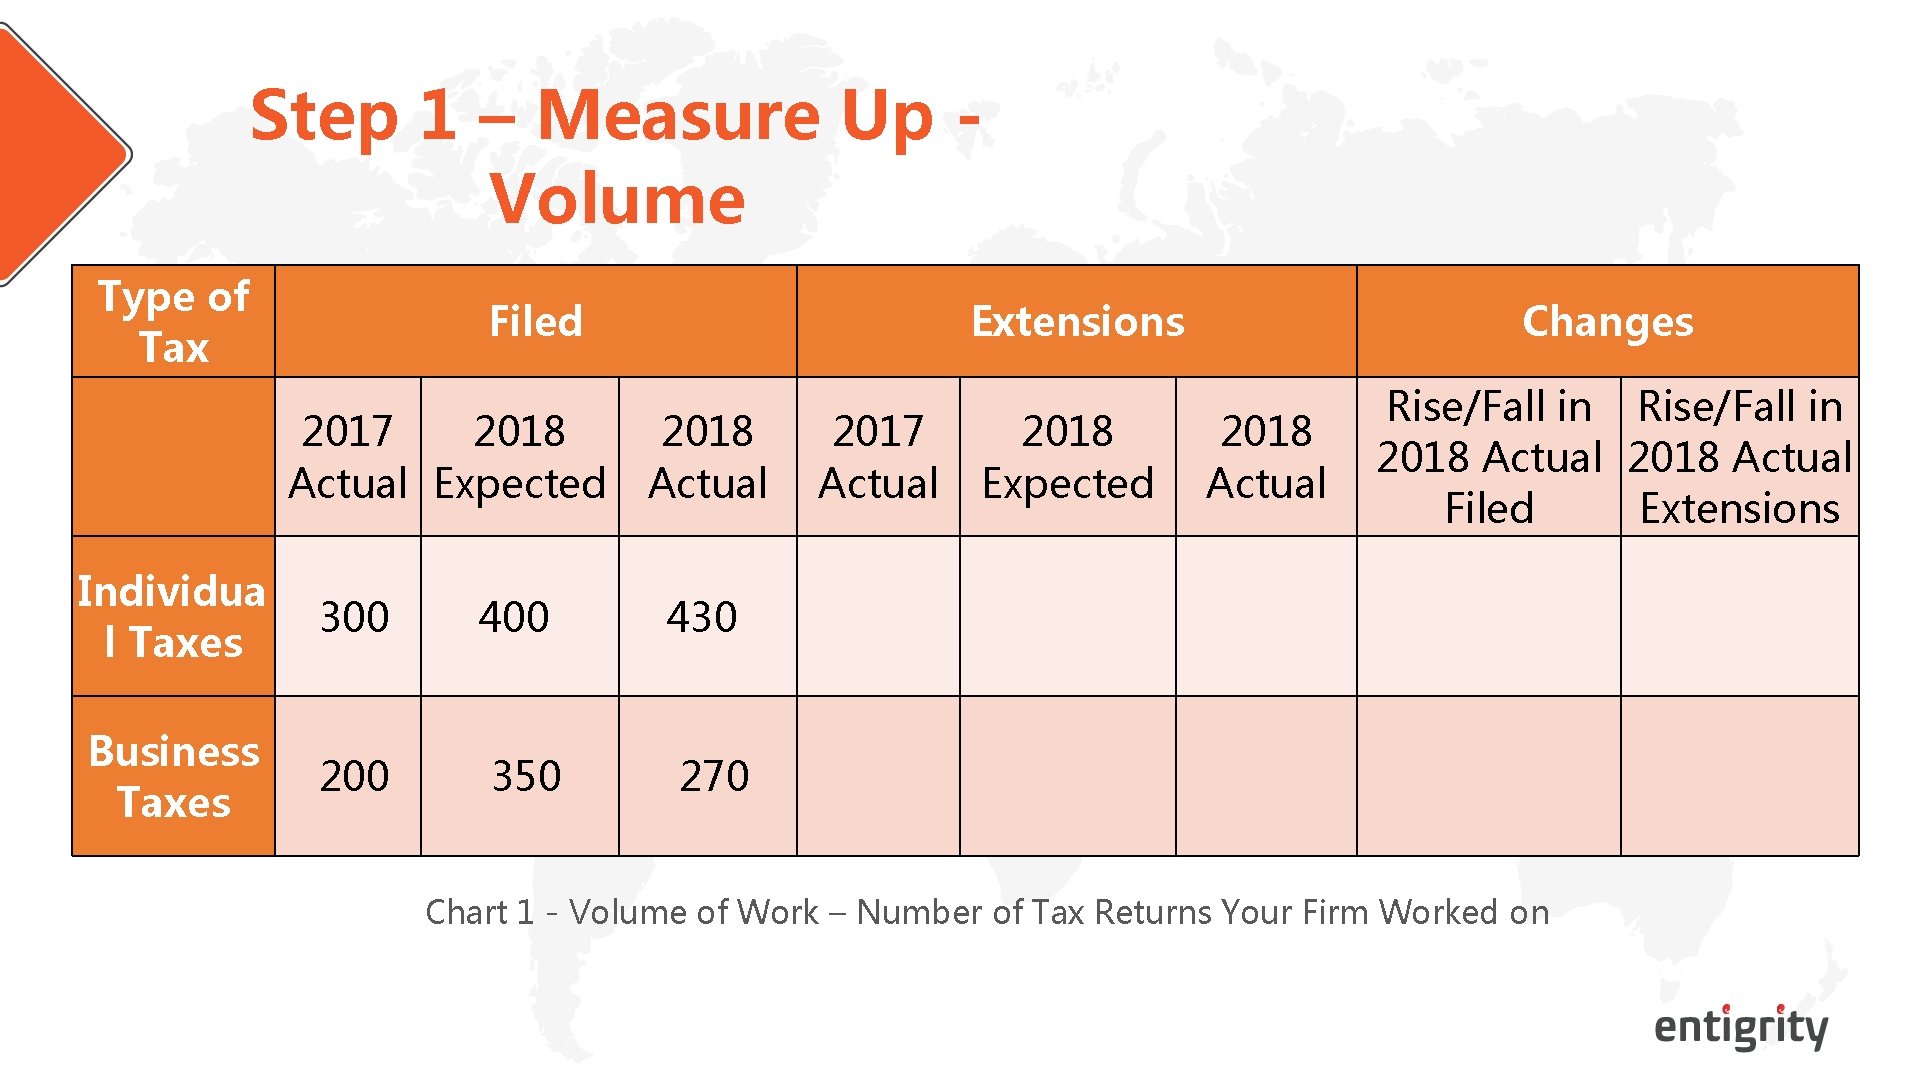 Step 1 – Measure Up - Volume Type of Tax Filed 2017 2018 Actual